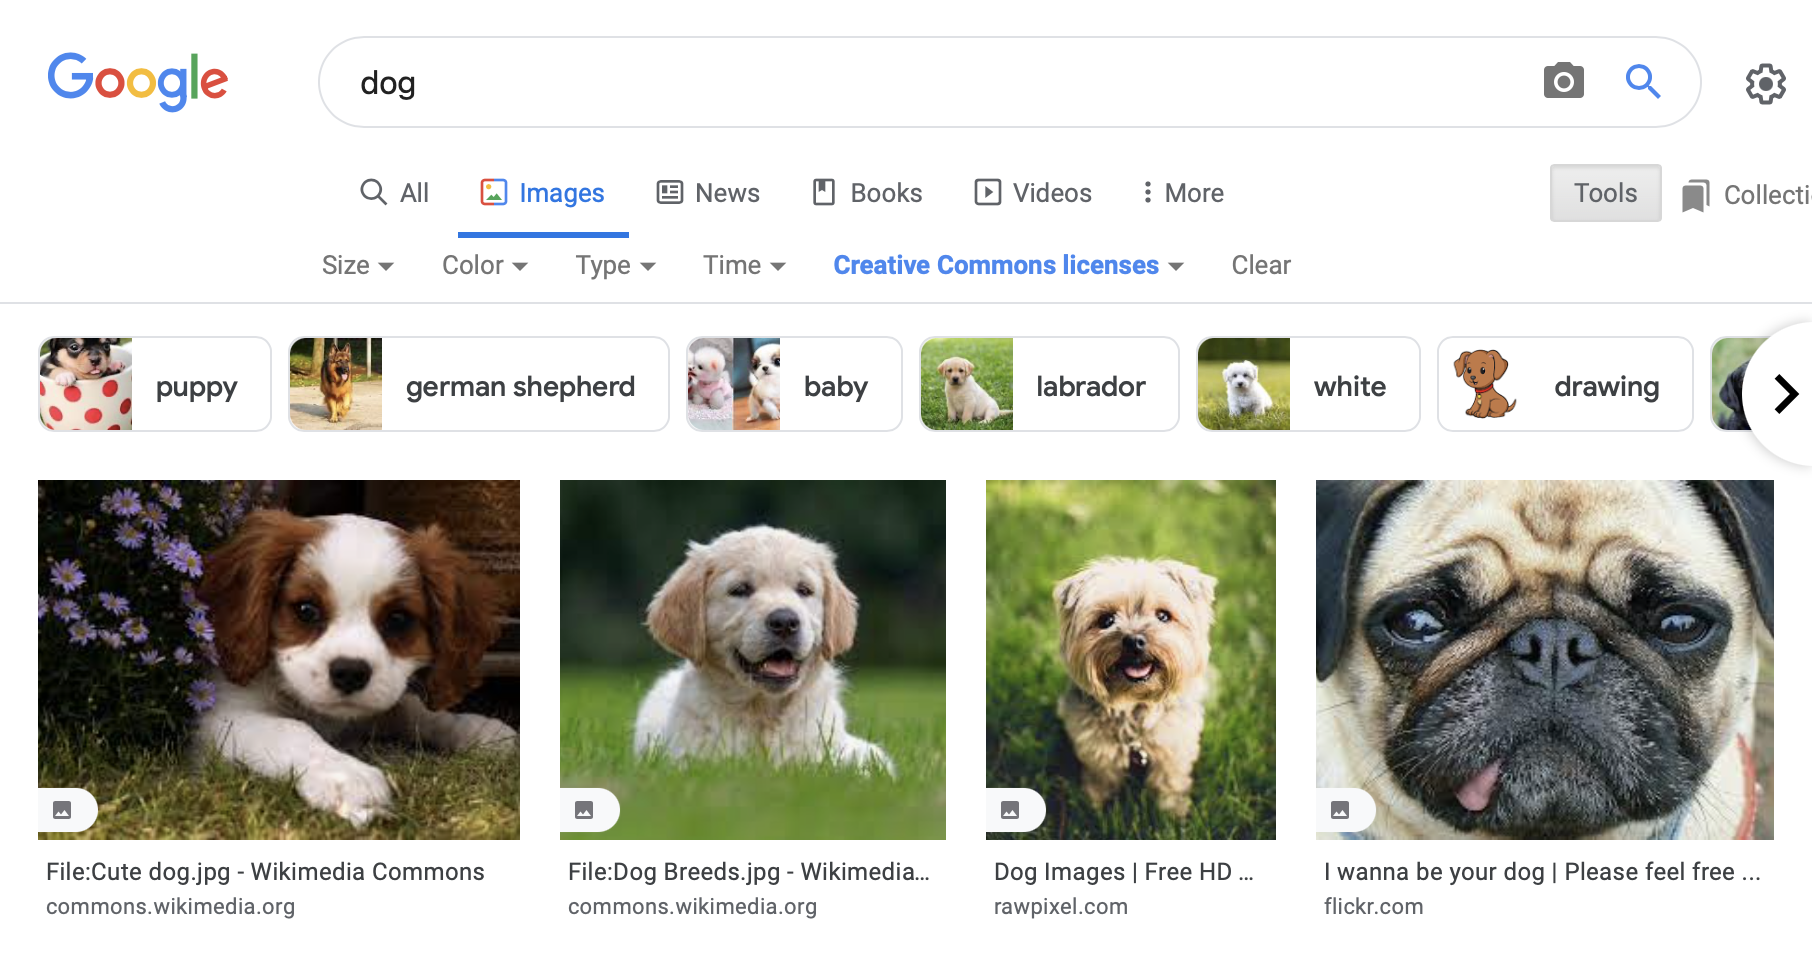 Google searching for 'dog' with the 'Creative Commons licenses' filter gives results from Wikimedia Commons and other sources.